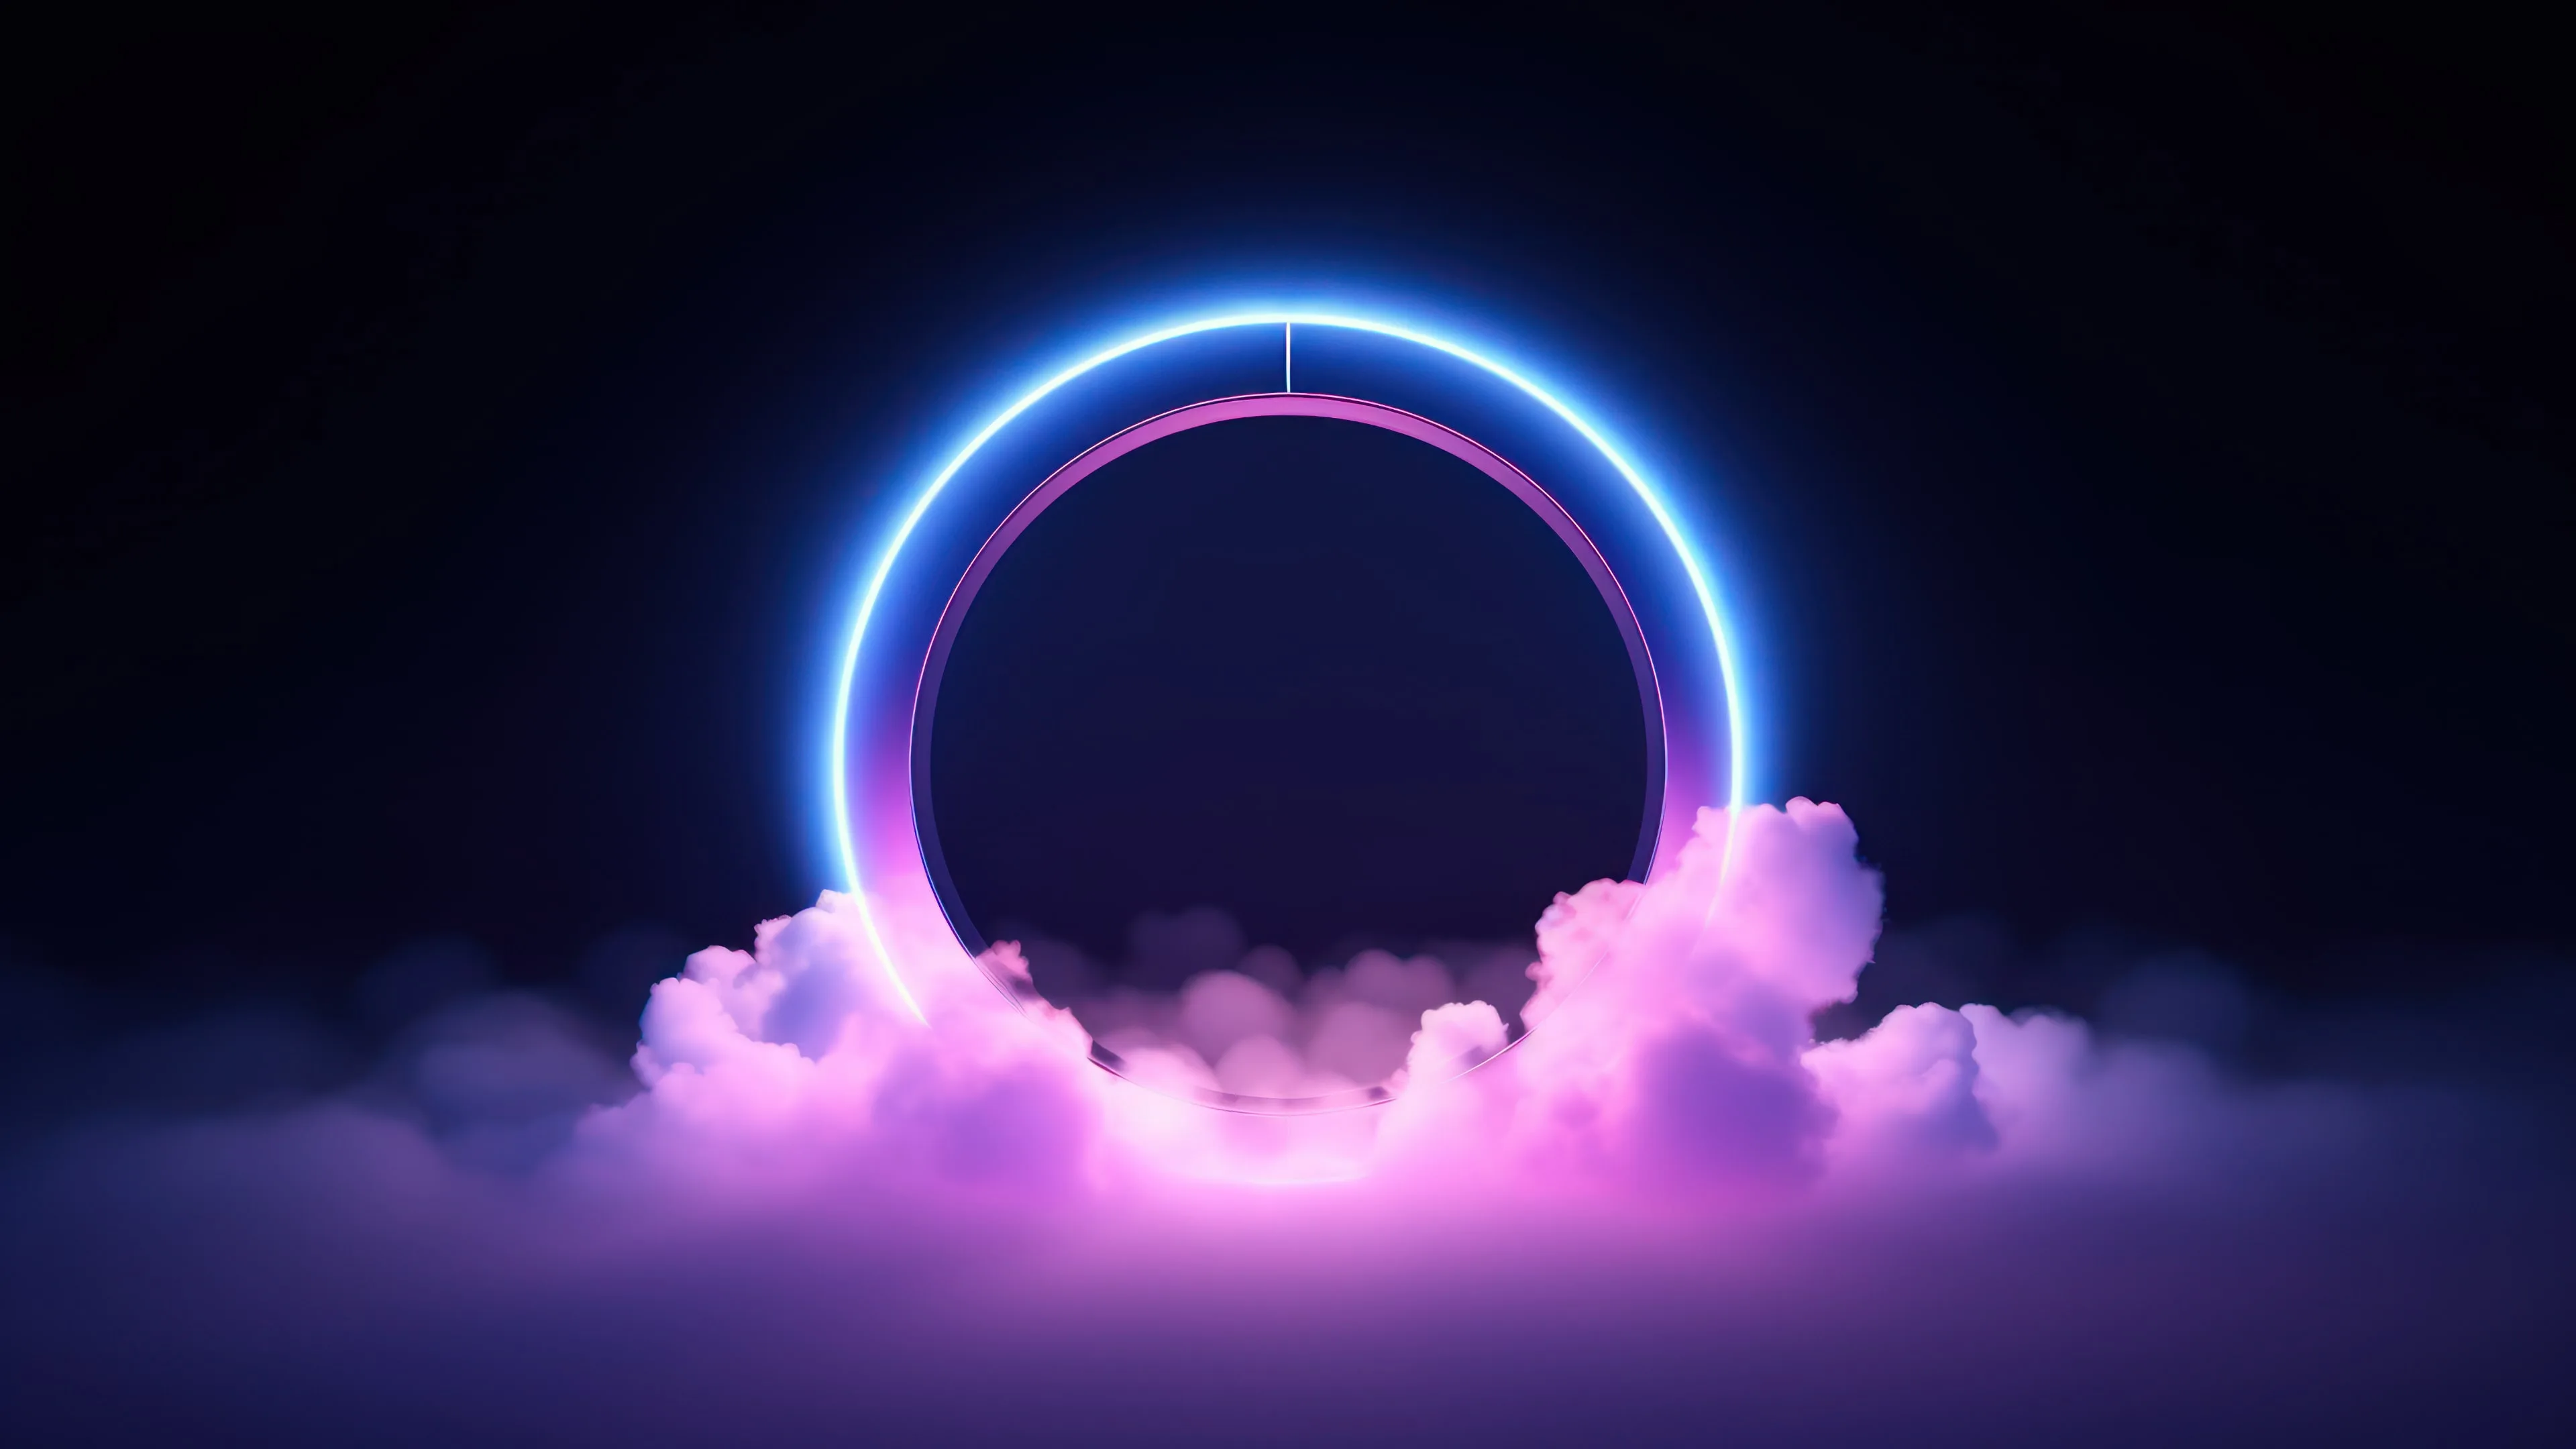 An ethereal 4K wallpaper featuring abstract clouds illuminated by vibrant neon lights, crafted through AI generation. The interplay of neon hues against the backdrop of the clouds creates a visually captivating and futuristic ambiance.